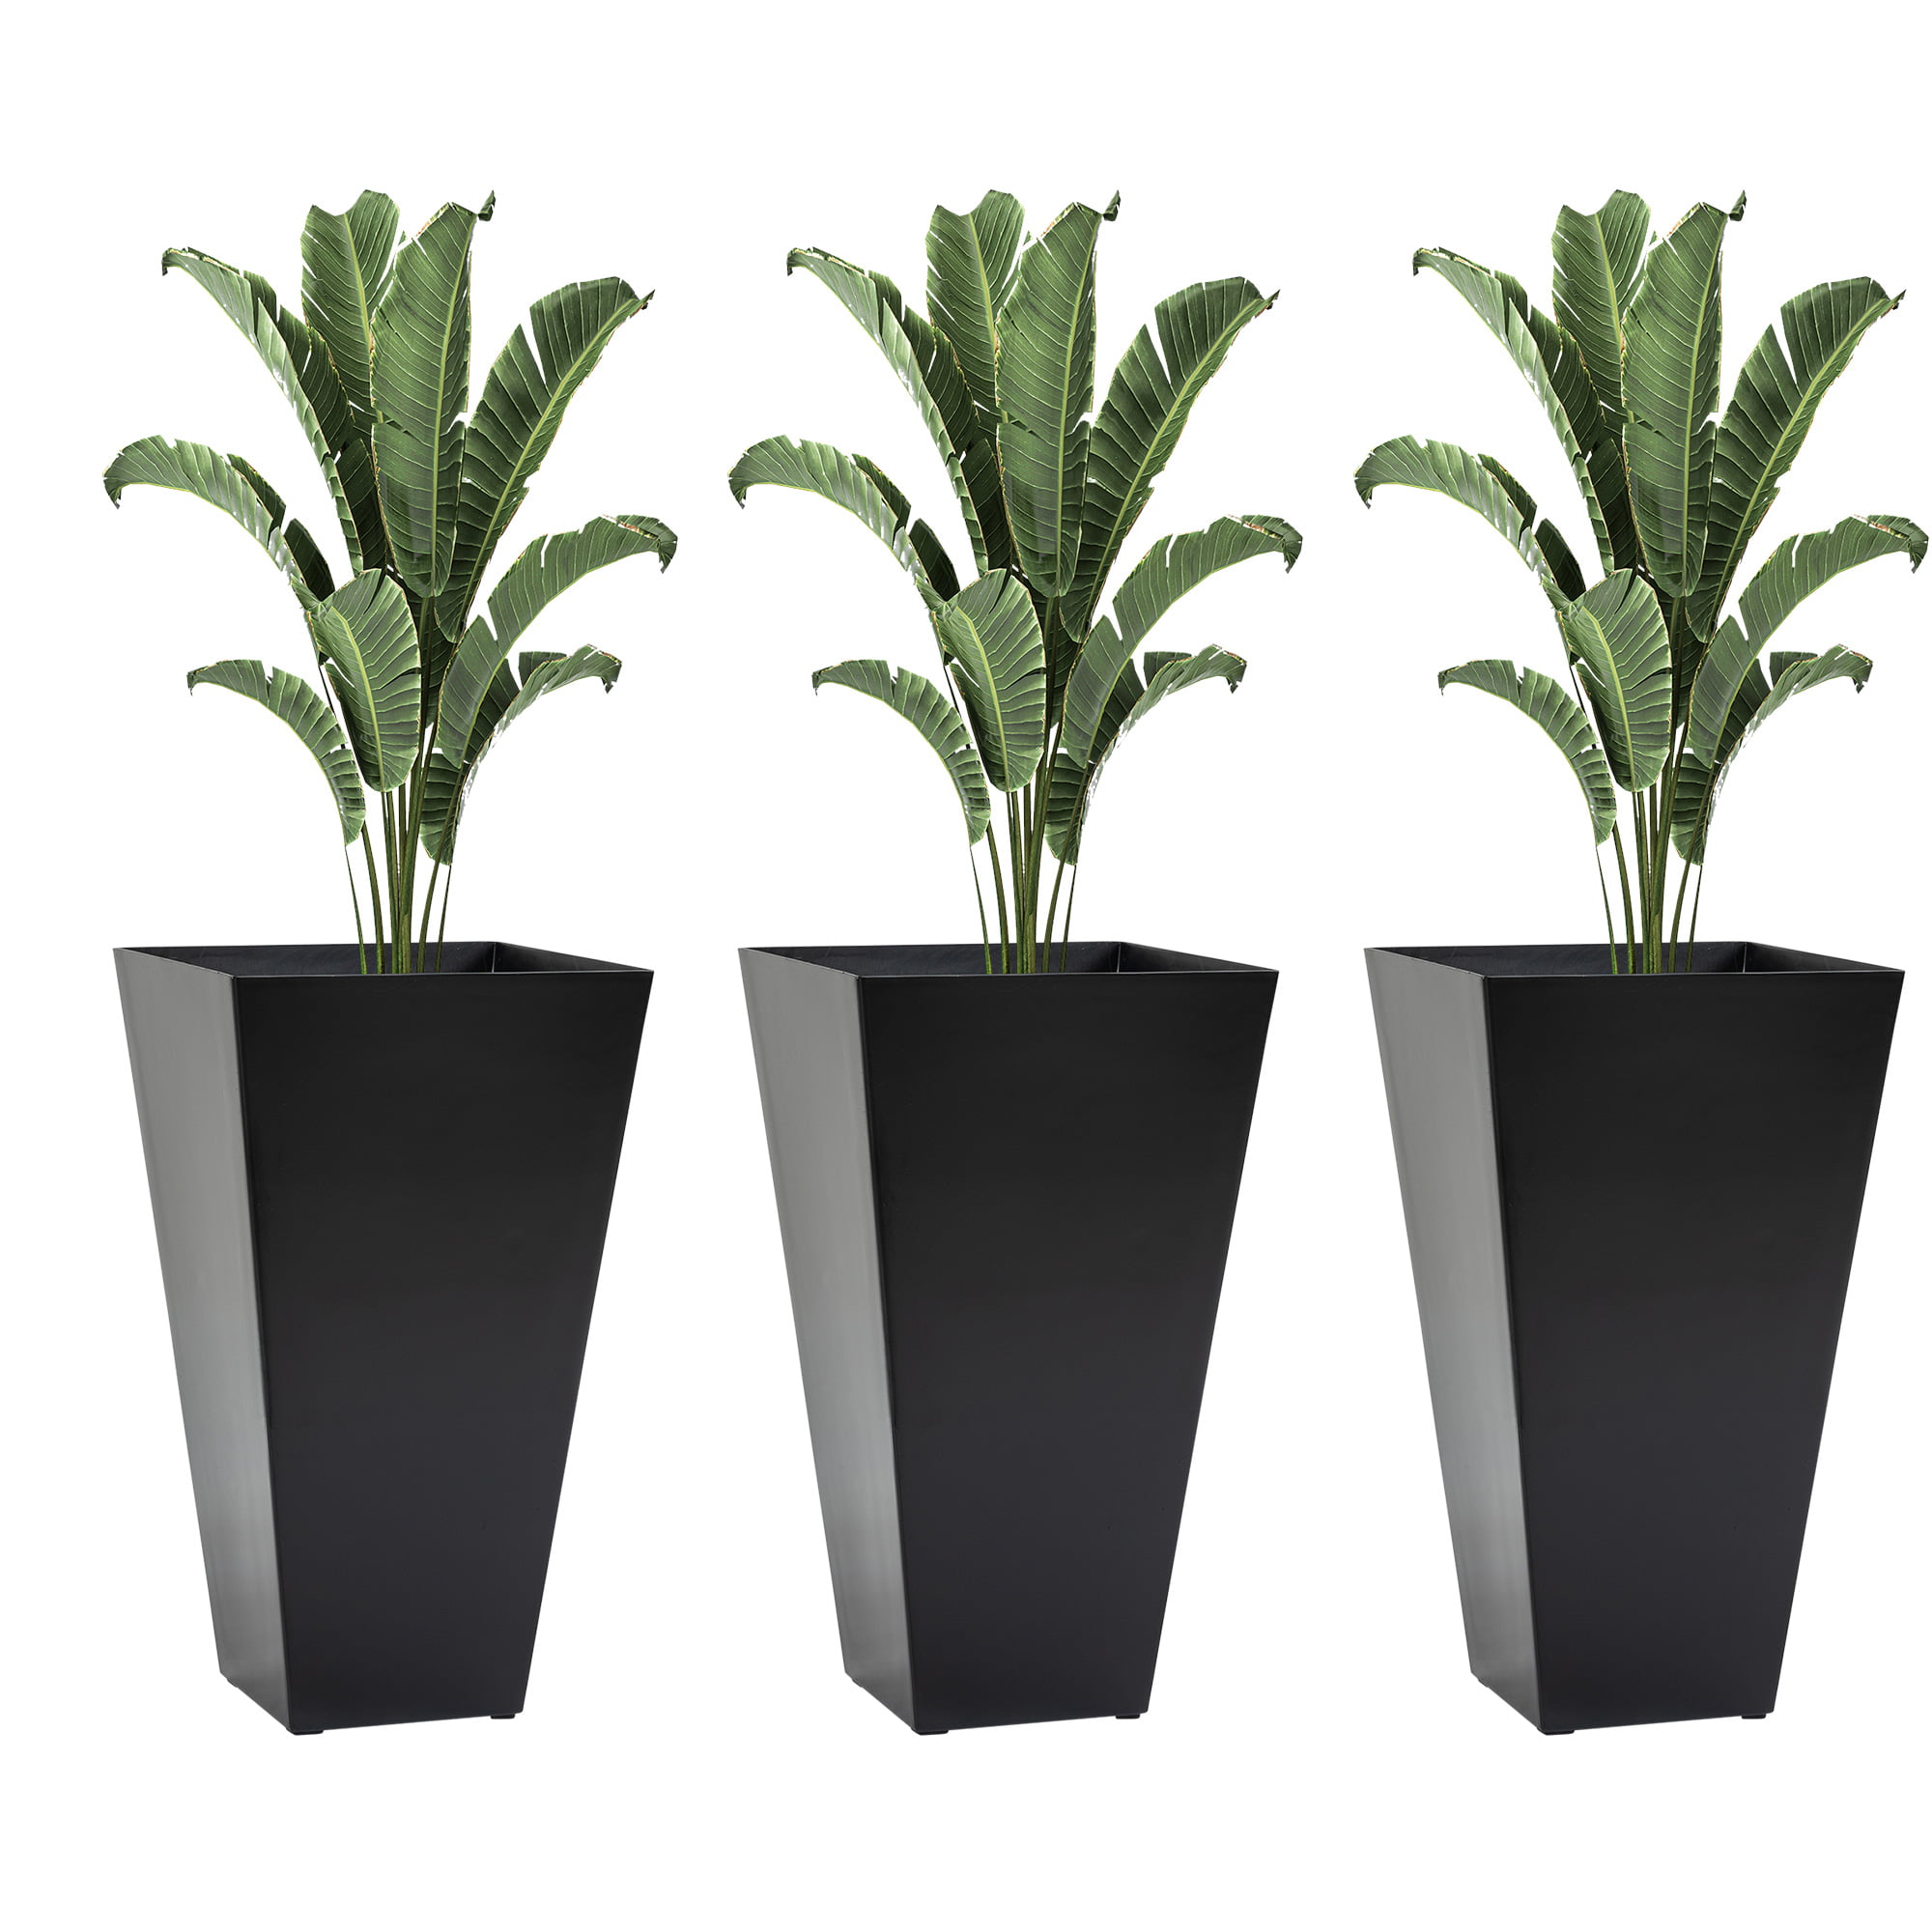 Outsunny 28" Tall Plastic Flower Pot, Set of 3, Large Outdoor & Indoor - image 1 of 10